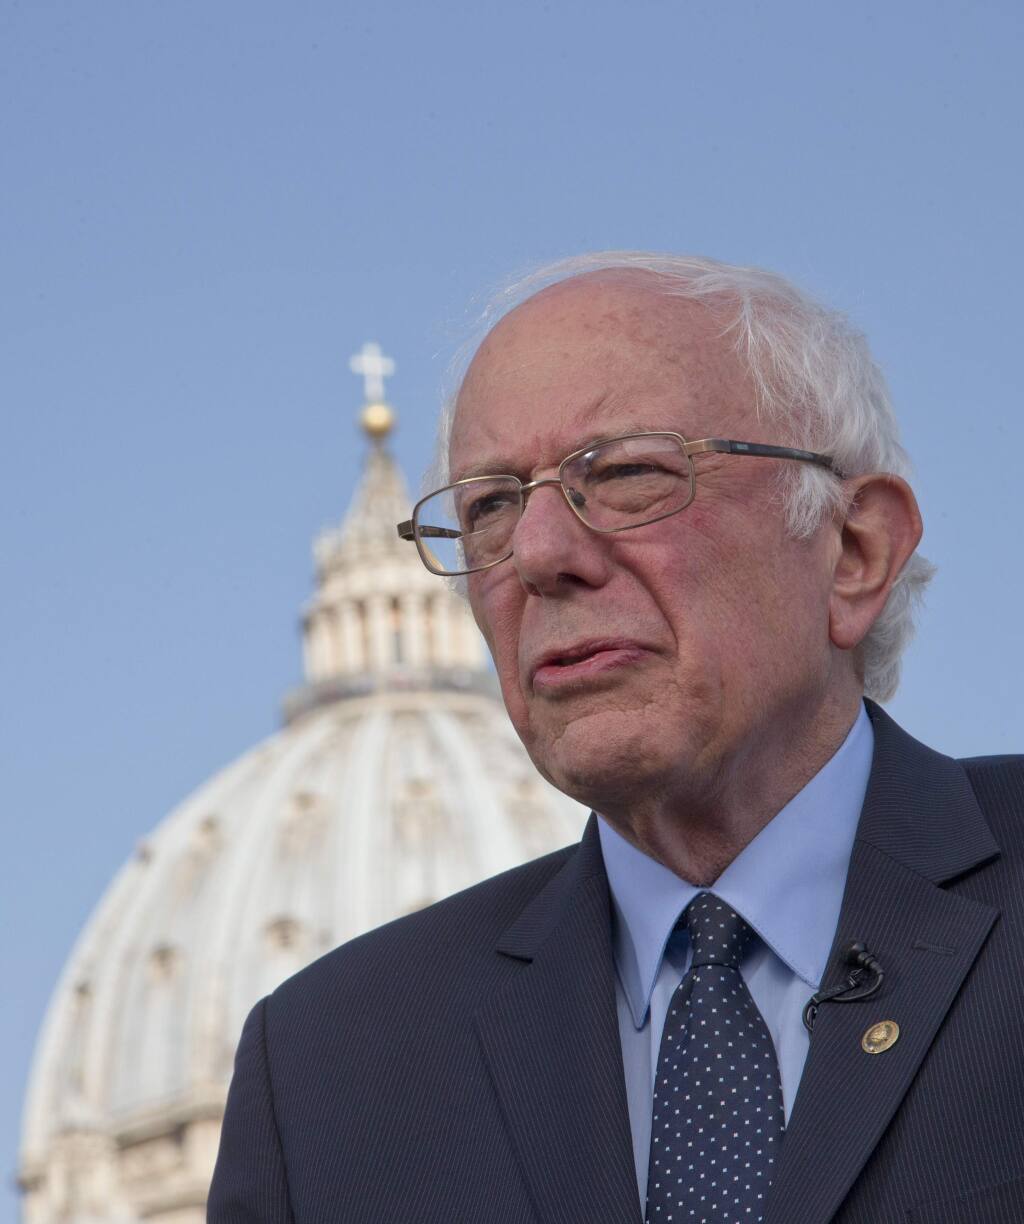 US presidential candidate Bernie Sanders, backdropped by the dome of St. Peter's Basilica, listens to questions during an interview with the Associated Press, at the Vatican Saturday, April 16, 2016. Democratic presidential candidate Bernie Sanders says in an interview with The Associated Press that he met with Pope Francis. Sanders says the meeting took place Saturday morning before the pope left for his one-day visit to Greece. He says he was honored by the meeting, and that he told the pope he appreciated the message that he is sending the world about the need to inject morality and justice into the world economy. (AP Photo/Alessandra Tarantino)